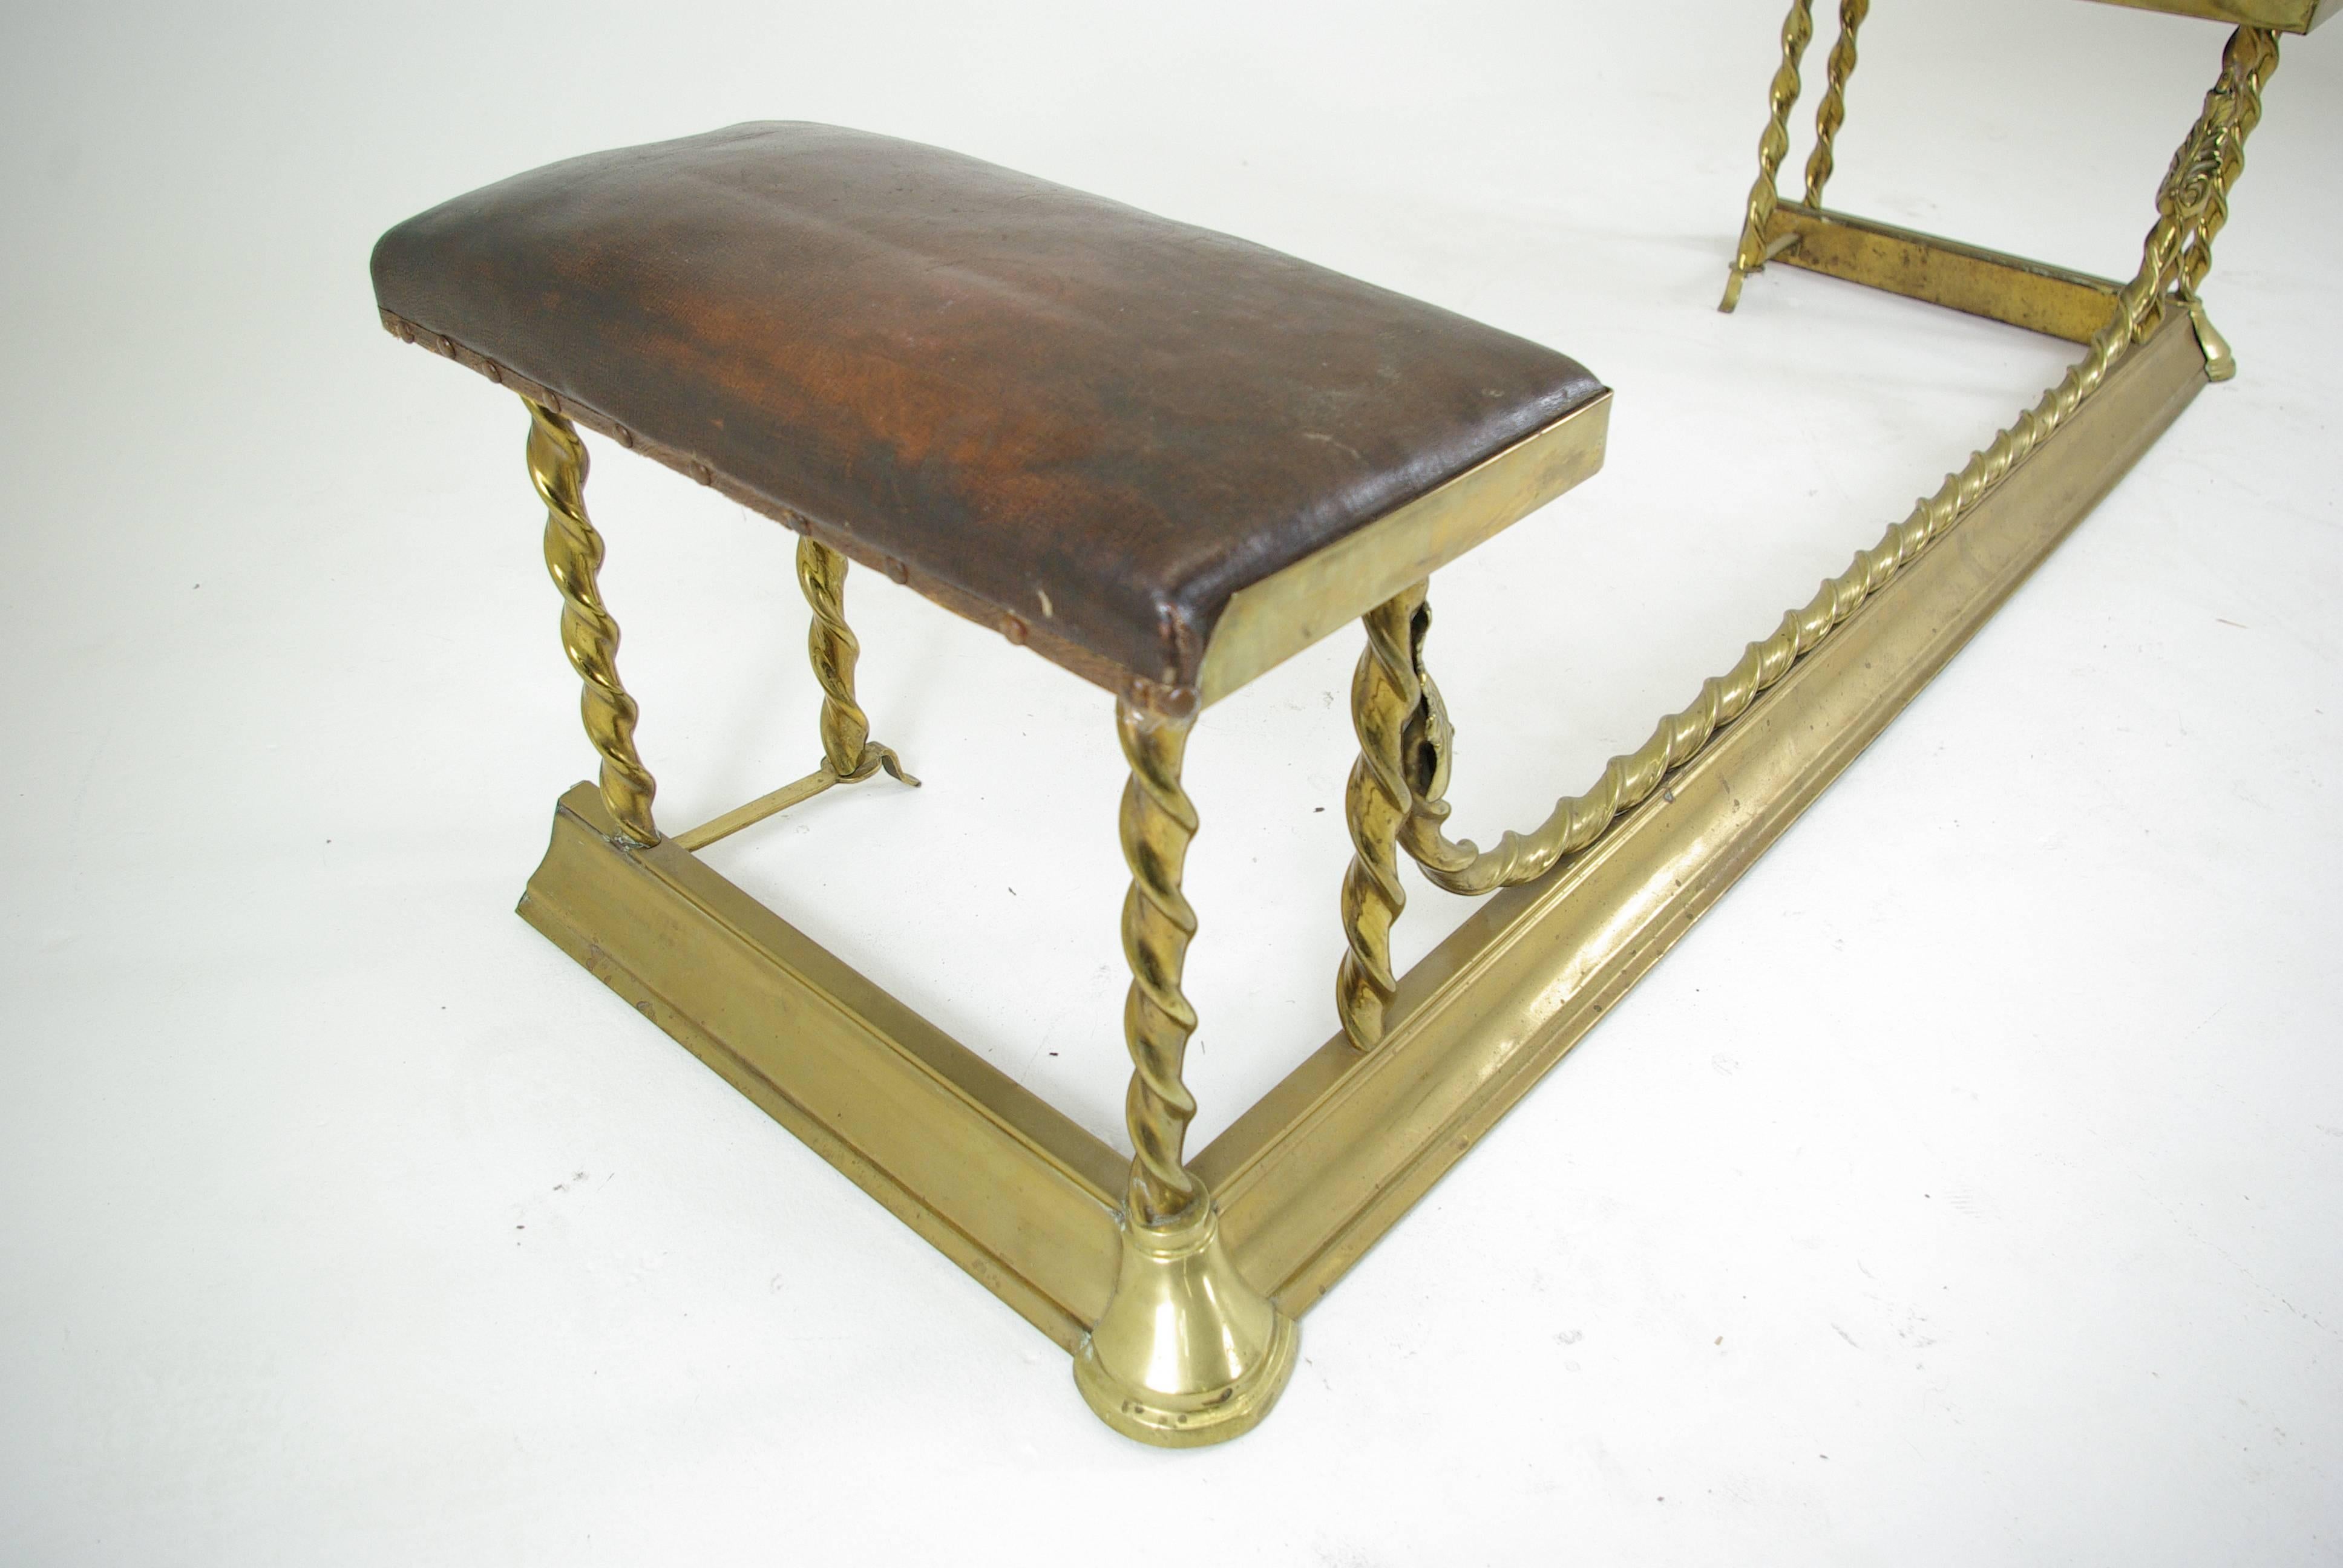 Early 20th Century Antique Scottish Victorian Brass Barley Twist Fireplace Curb with Uphol Seating